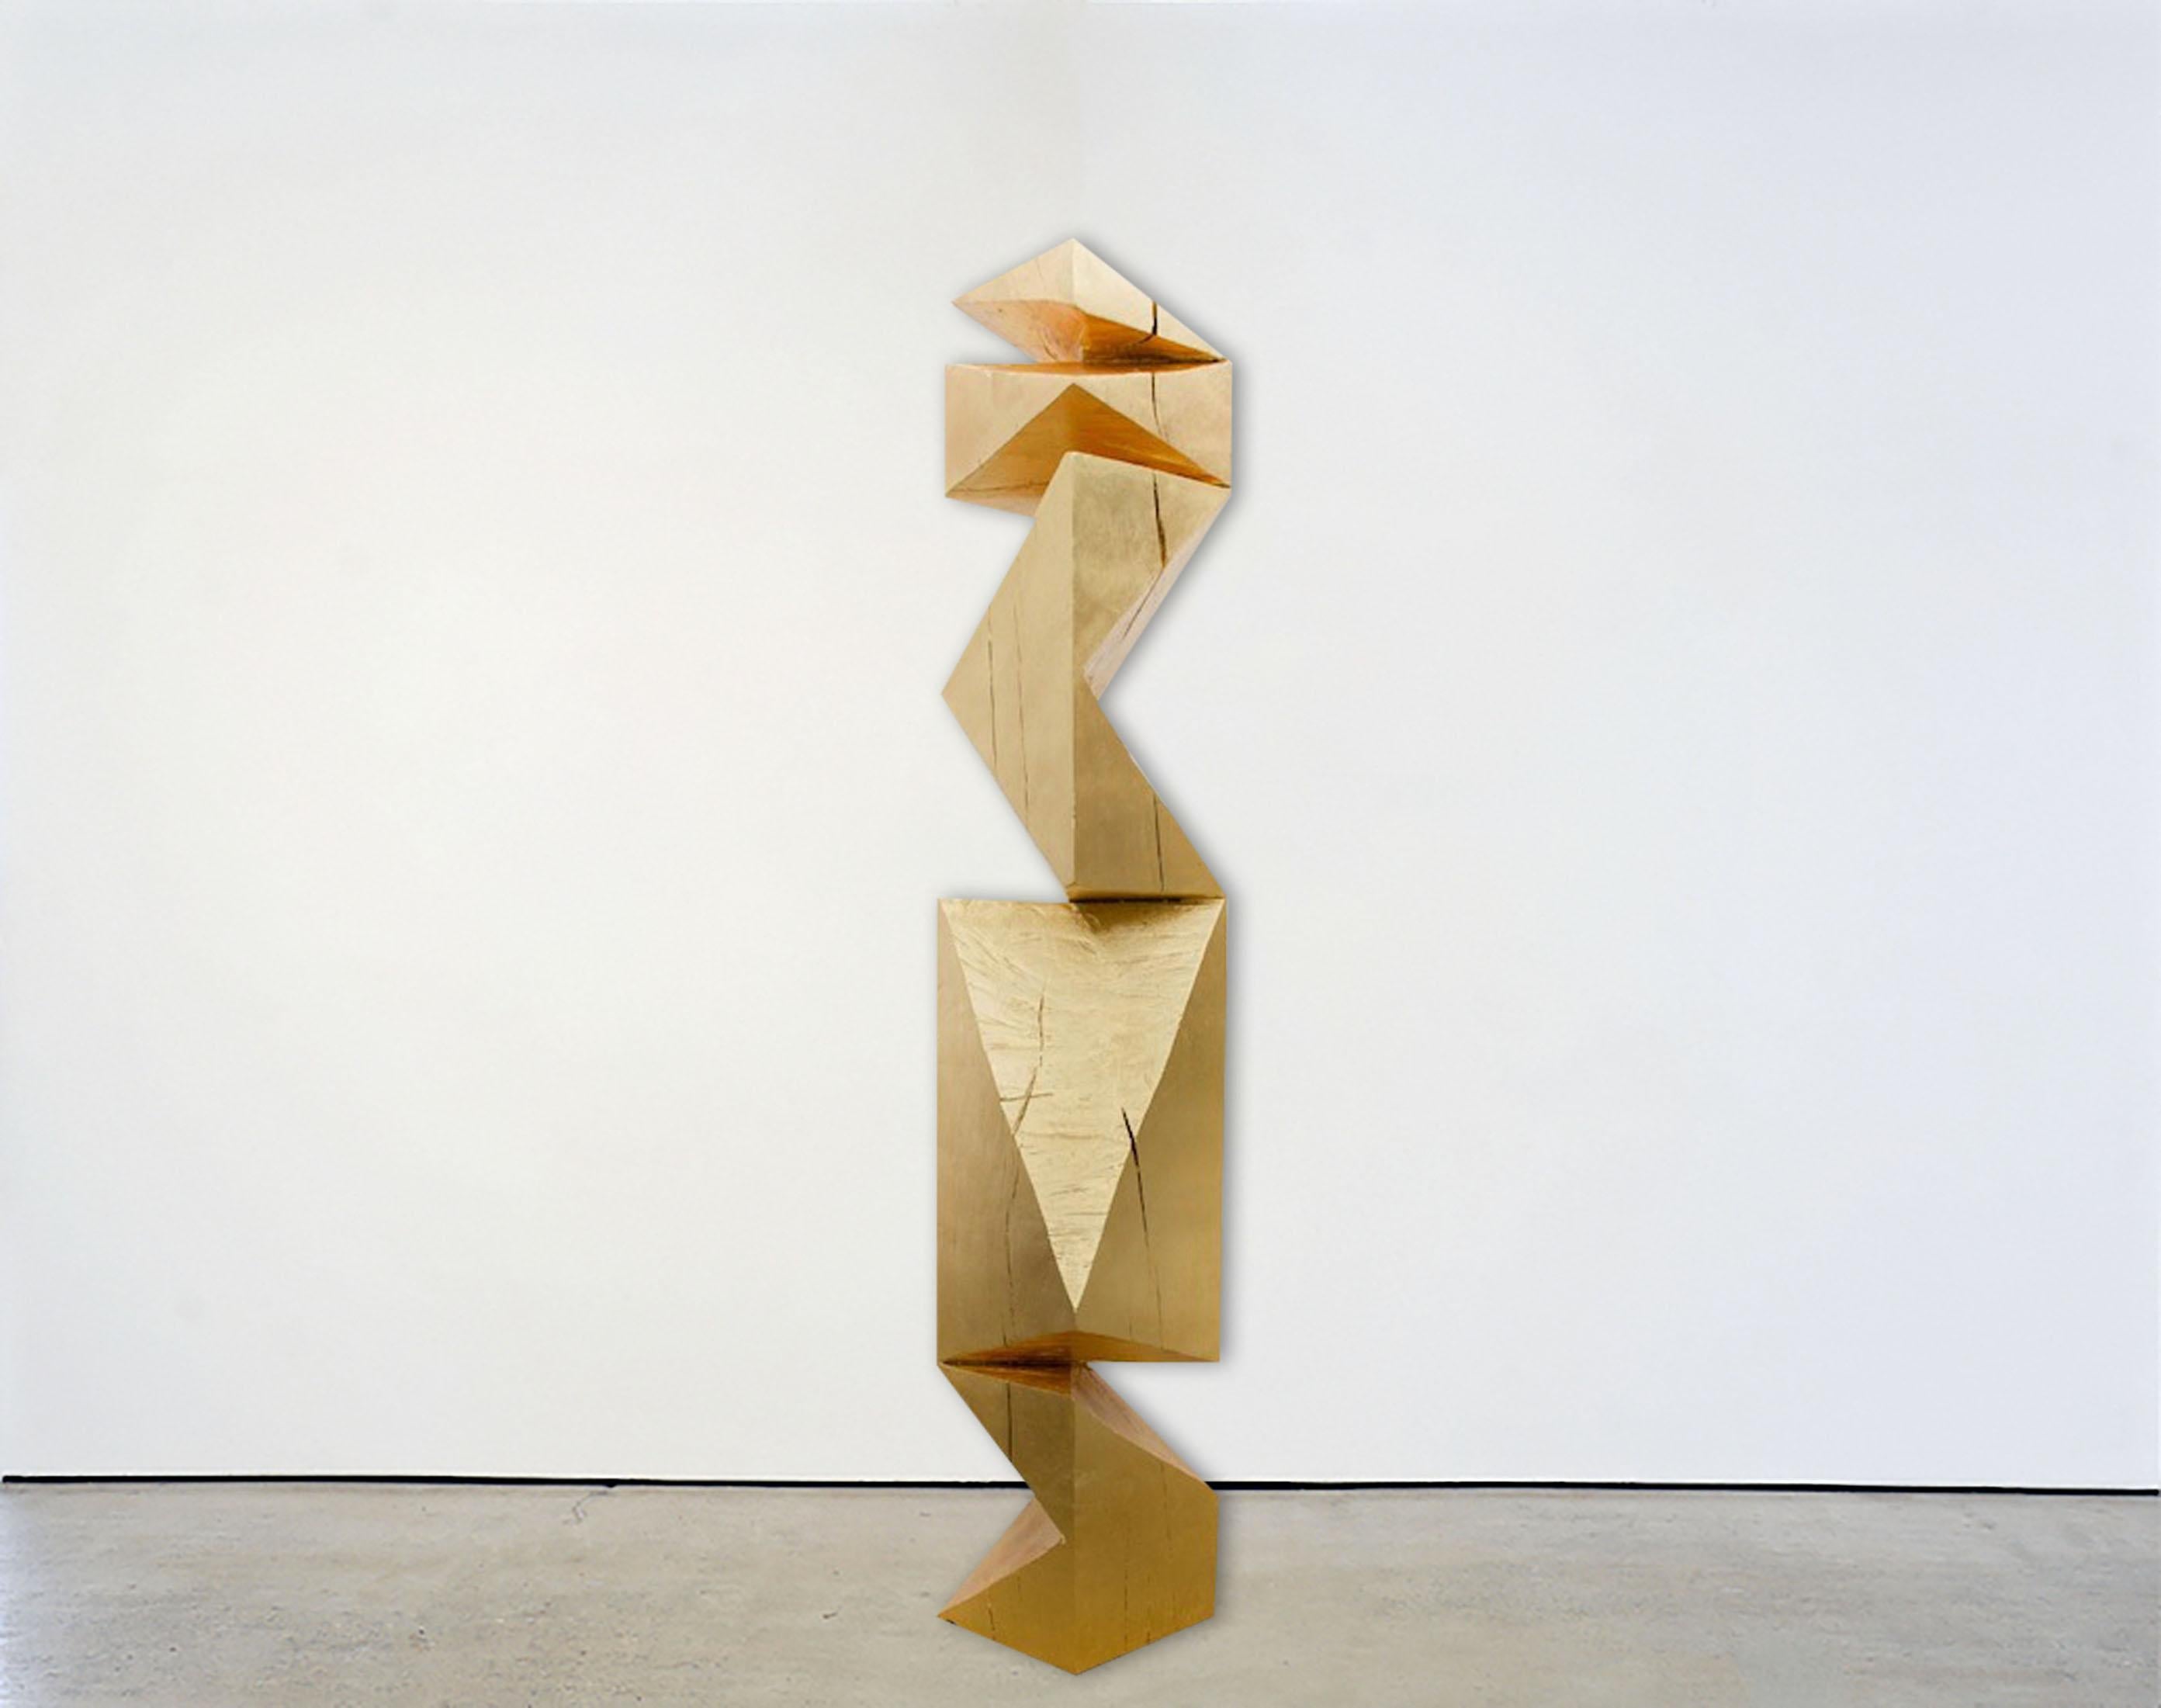 Aldo Chaparro is a Mexican/Peruvian artist whose work focuses on the use of sculpture and oainting to explore form in post-industrial ways. He currently lives and works between Mexico City, Los Angeles, Madrid, and Lima. Chaparro explores form